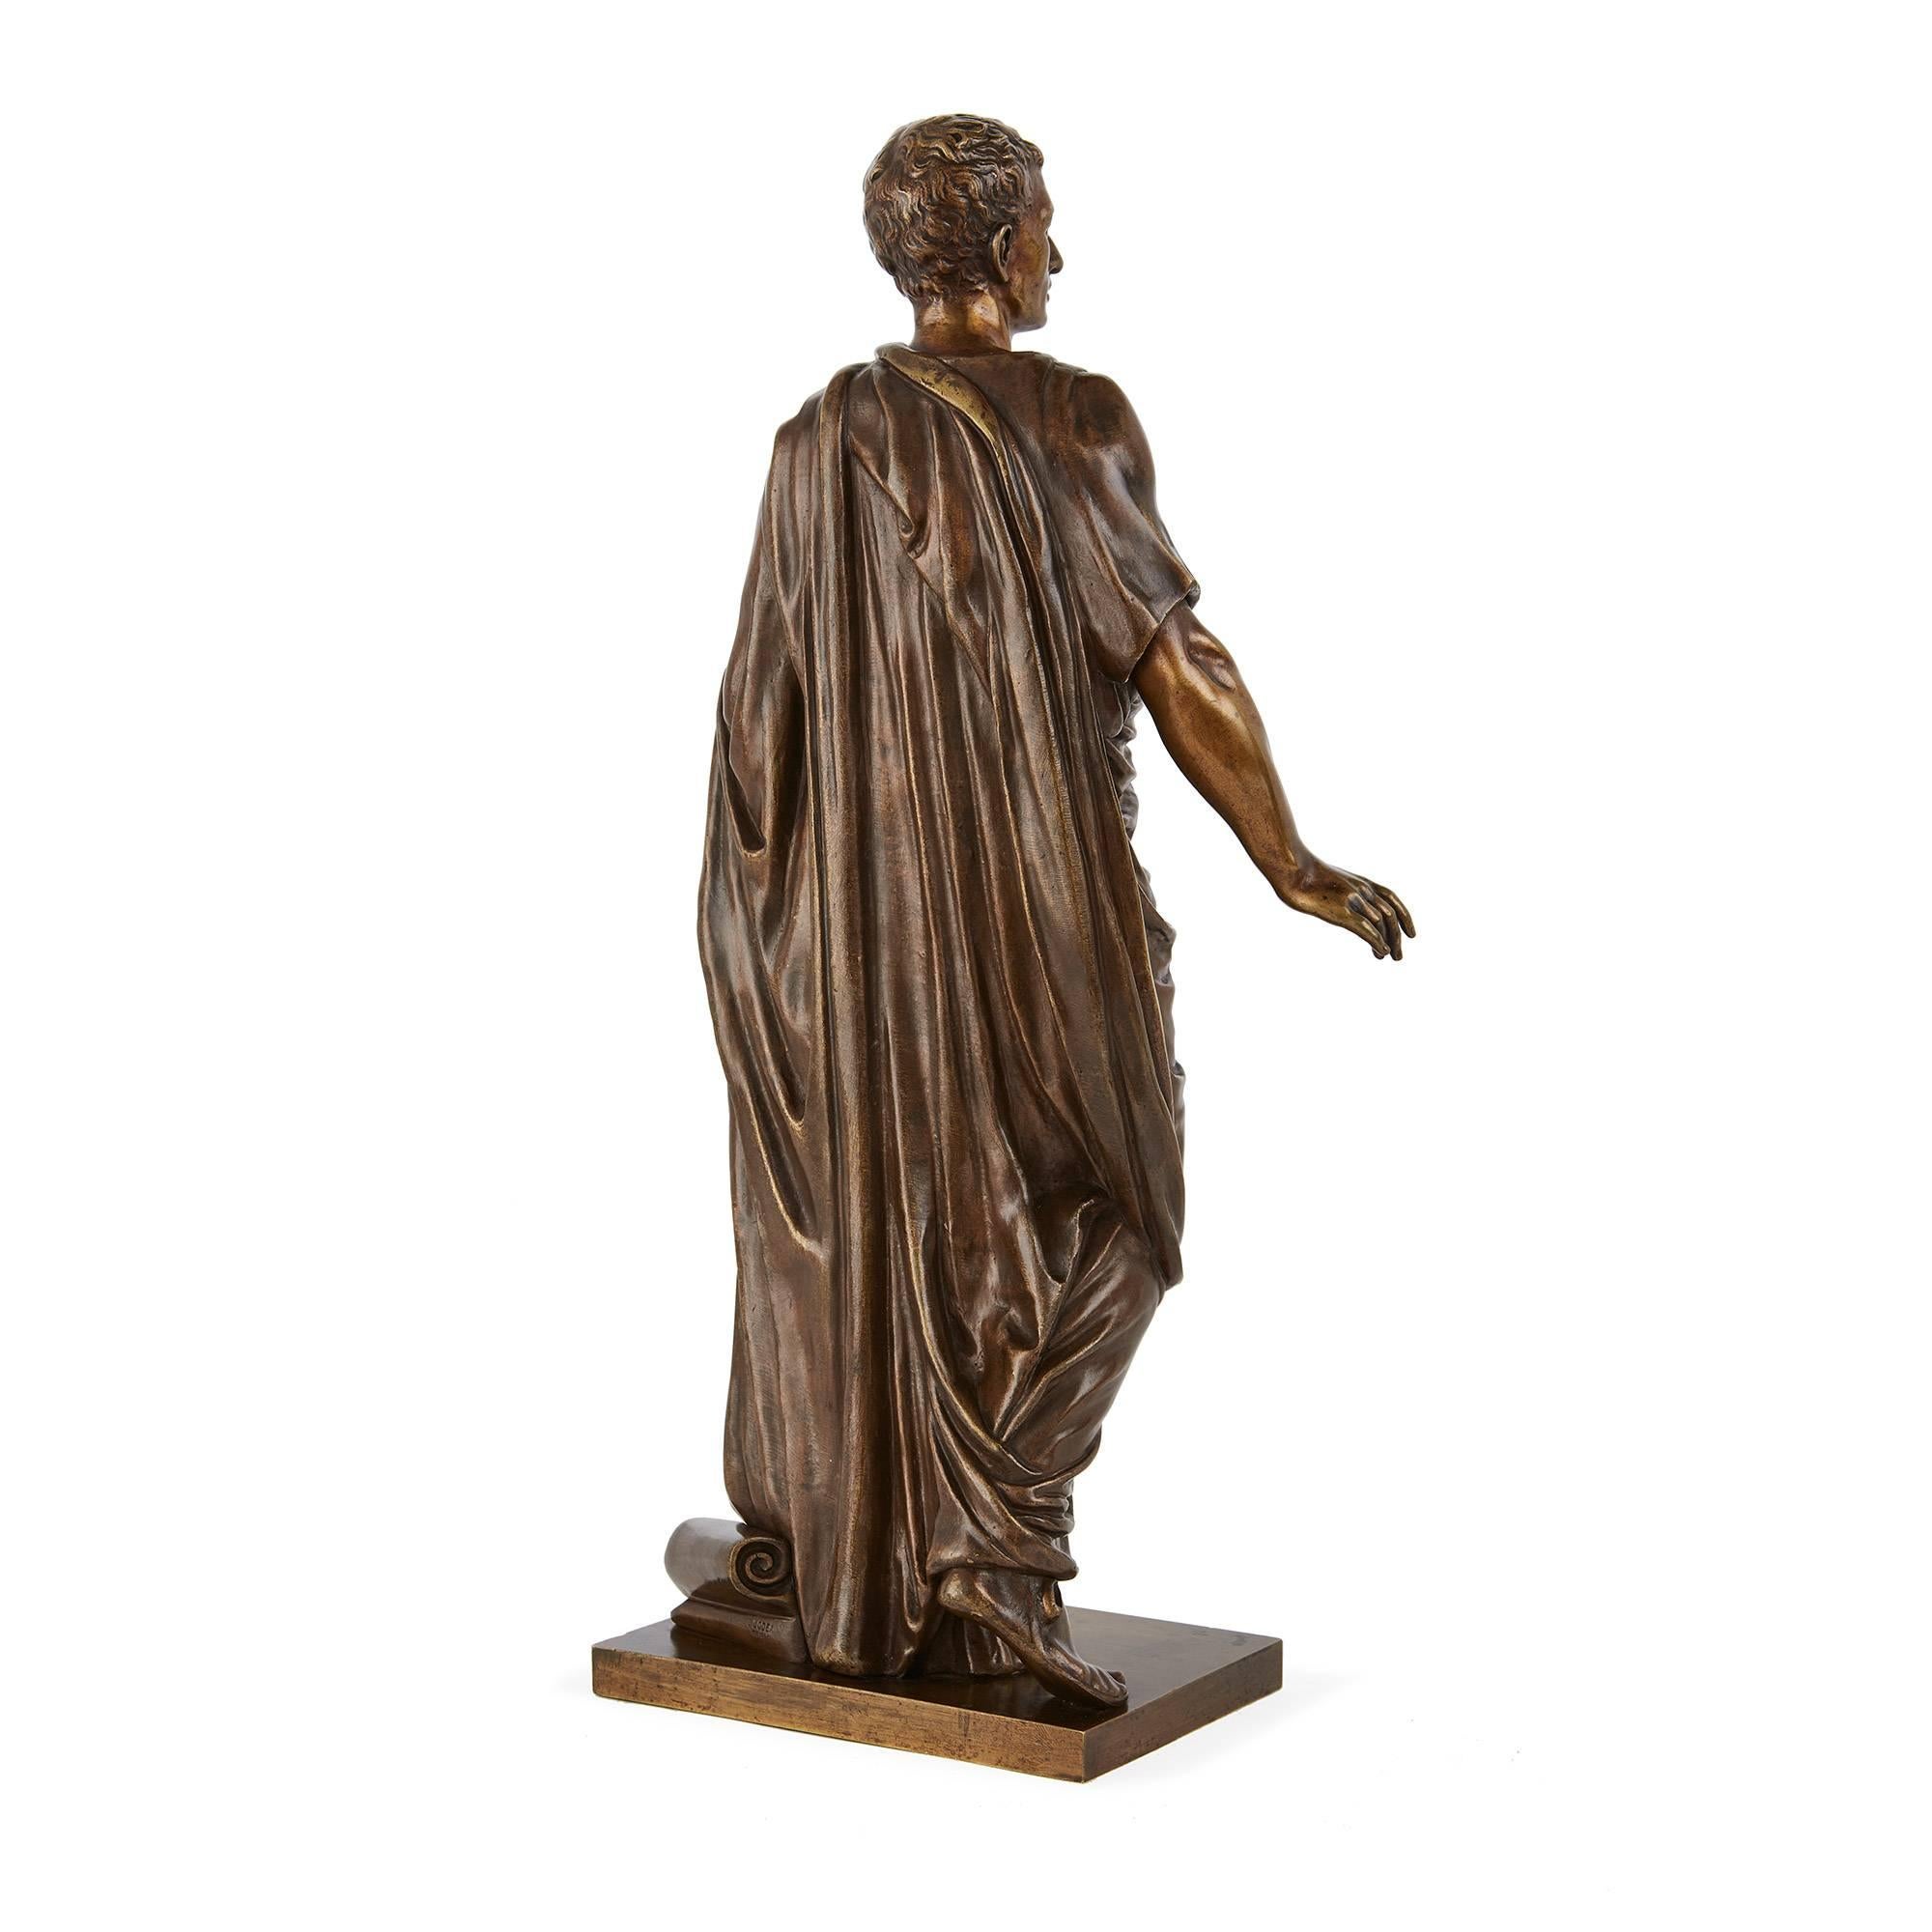 This fine, full length figure is modelled in the contrapposto pose, a position originating from ancient Greek Classical sculpture. The visual arts uses the term 'contrapposto' to describe a figure who stands with most of their weight on one foot, so